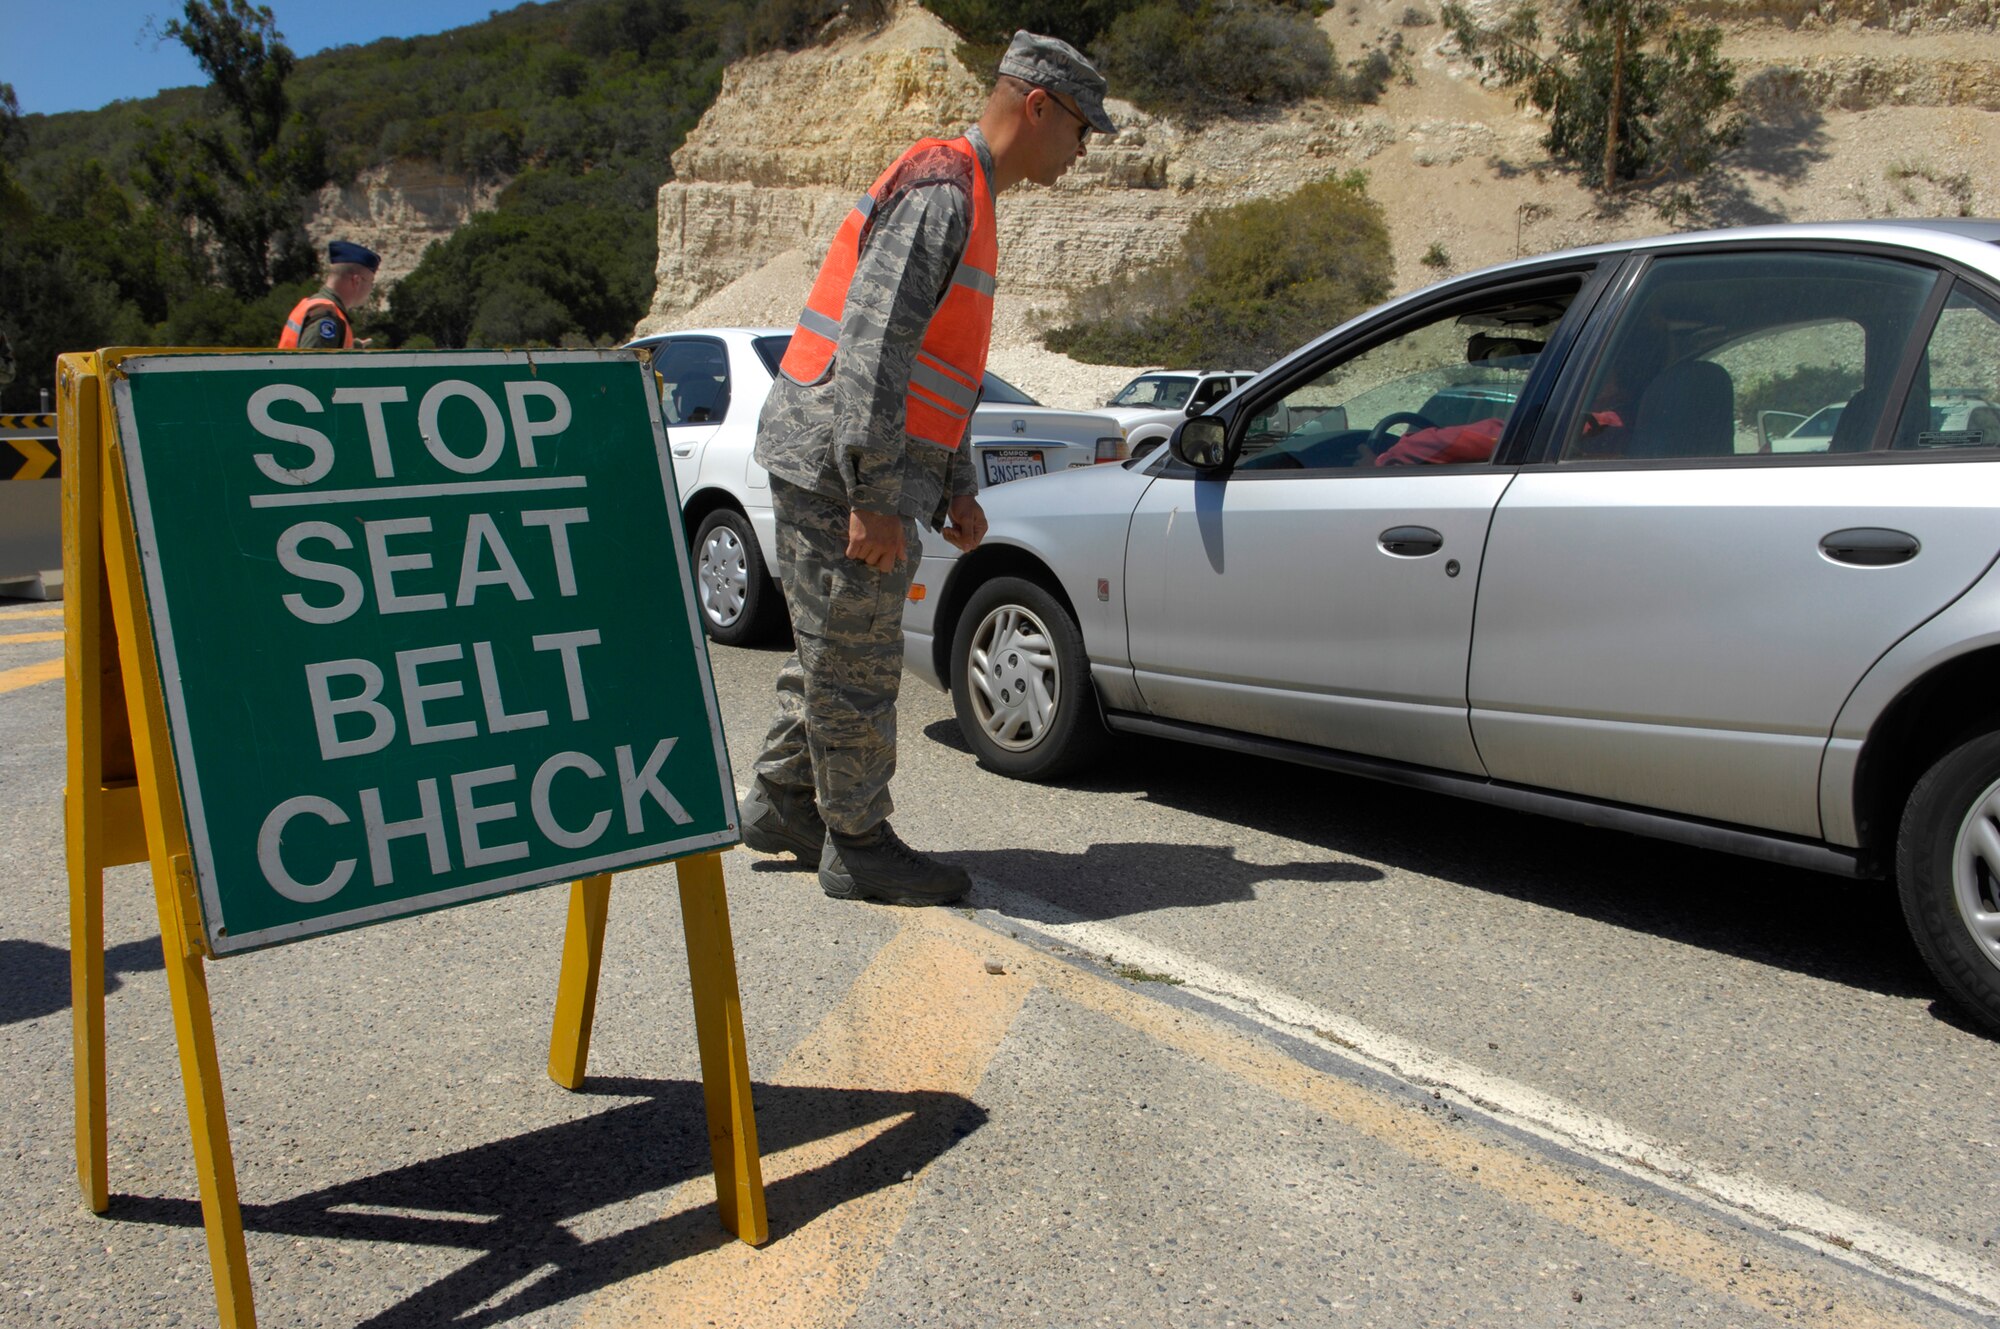 VANDENBERG AIR FORCE BASE, Calif-- Maj. Jerame Cohen of the 30th Logistics Readiness Squadron makes seat belt checks at the Lompoc Gate here Aug. 1. (U.S. Air Force photo/Airman 1st Class Andrew Lee)